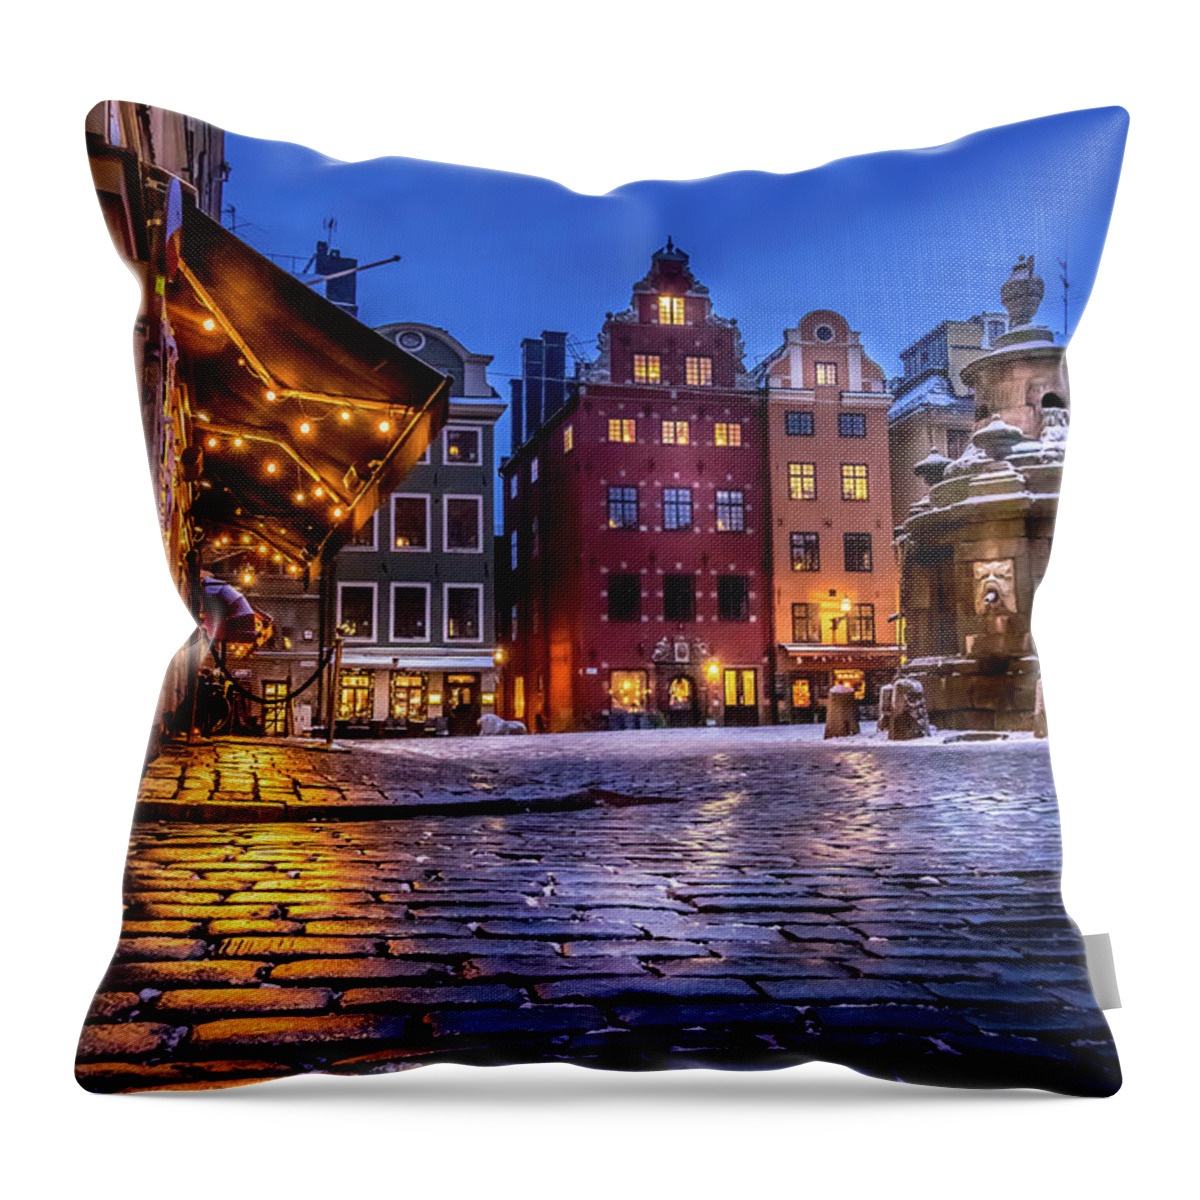 Gamla Stan Throw Pillow featuring the photograph The Old Town Winter Night I by Nicklas Gustafsson